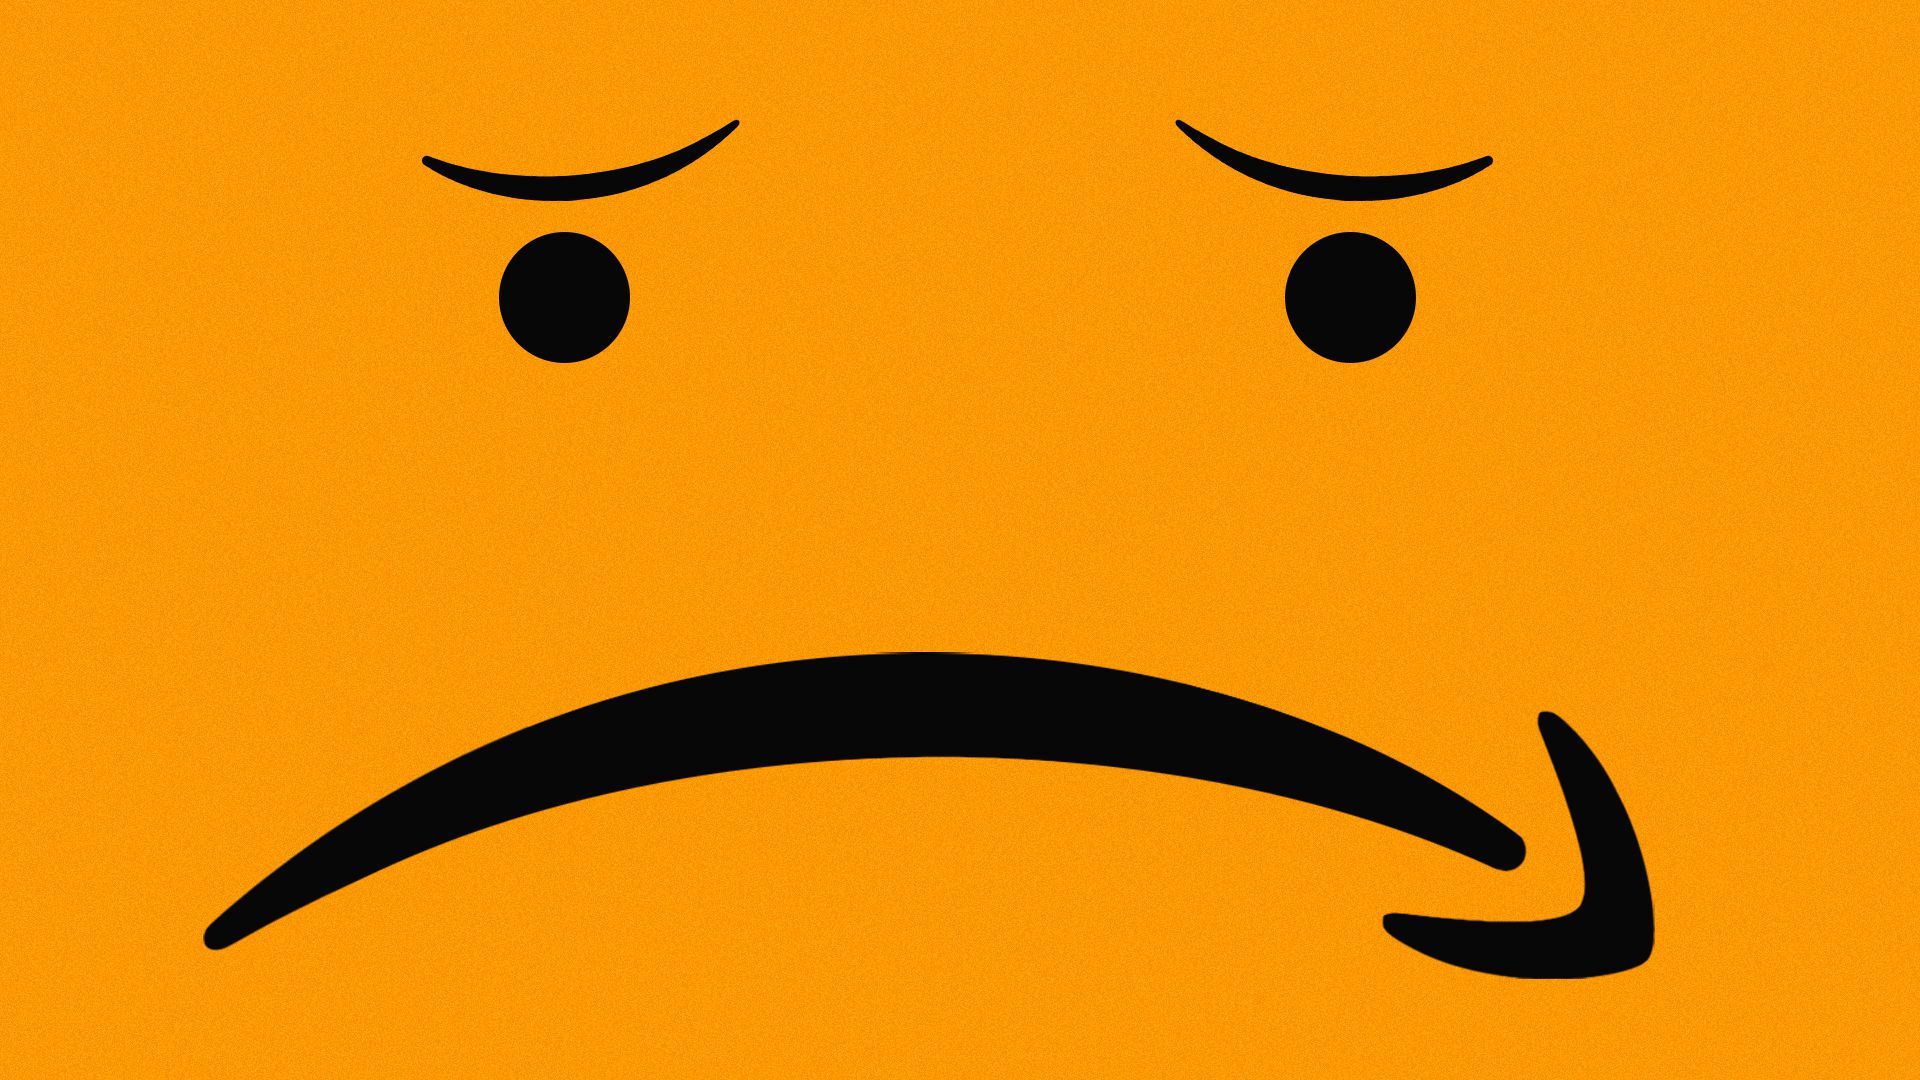 Illustration of a frowny face with an upside down Amazon arrow as the mouth.